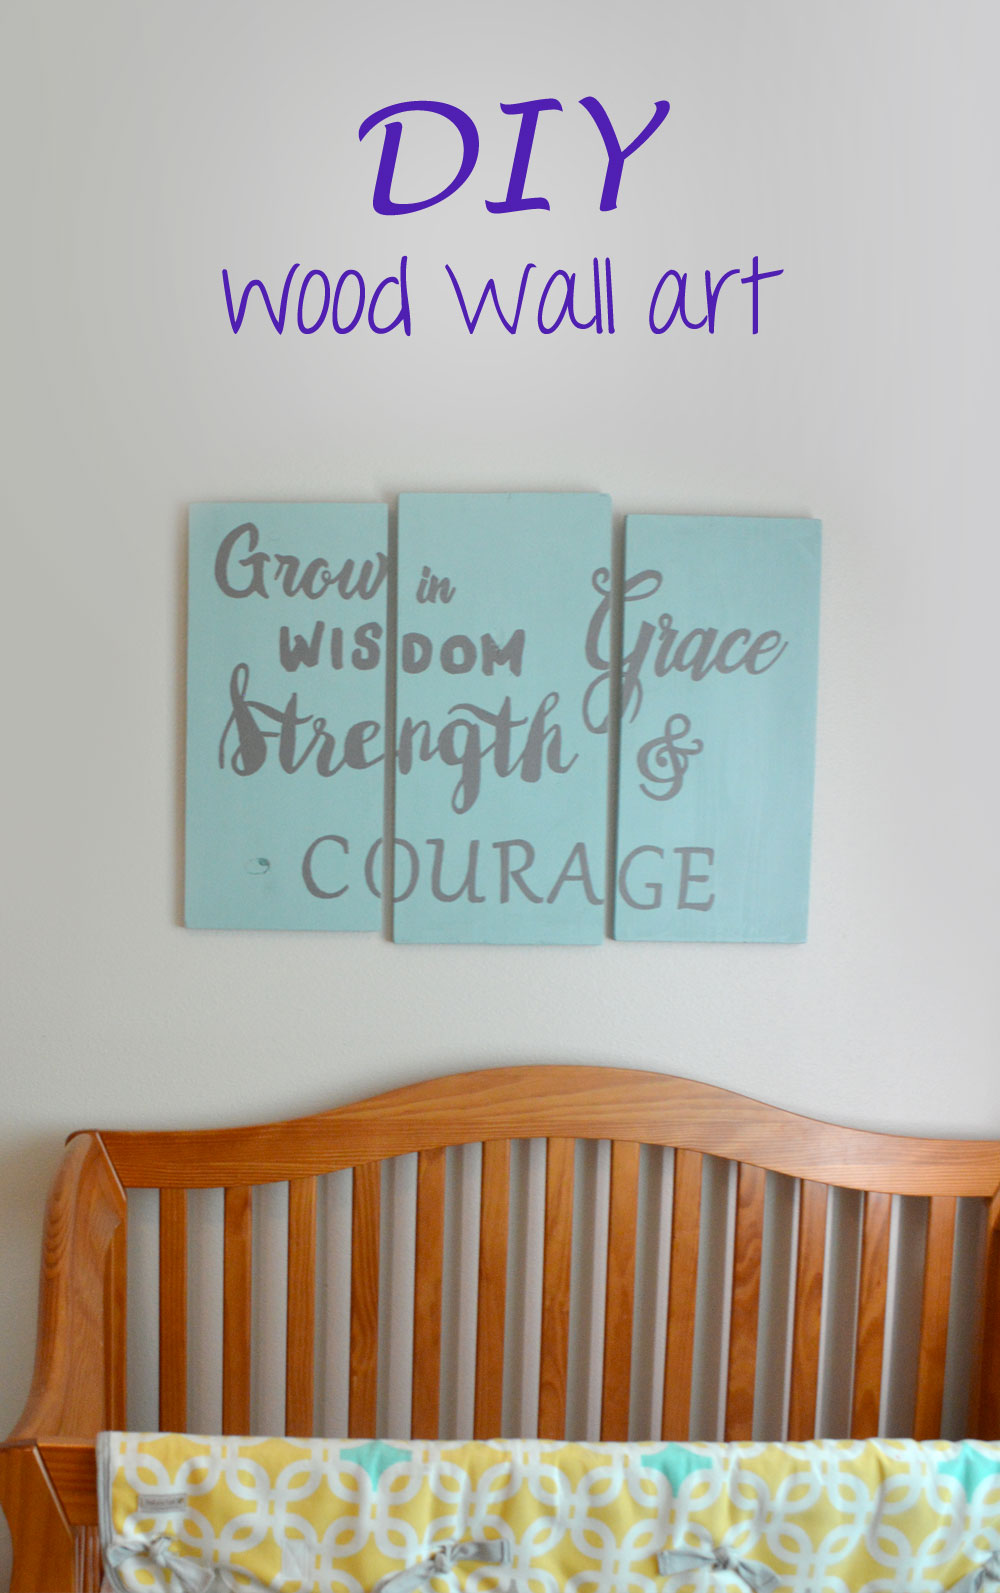 DIY wood wall art with custom lettering stencils for kid's room - Mommy Scene